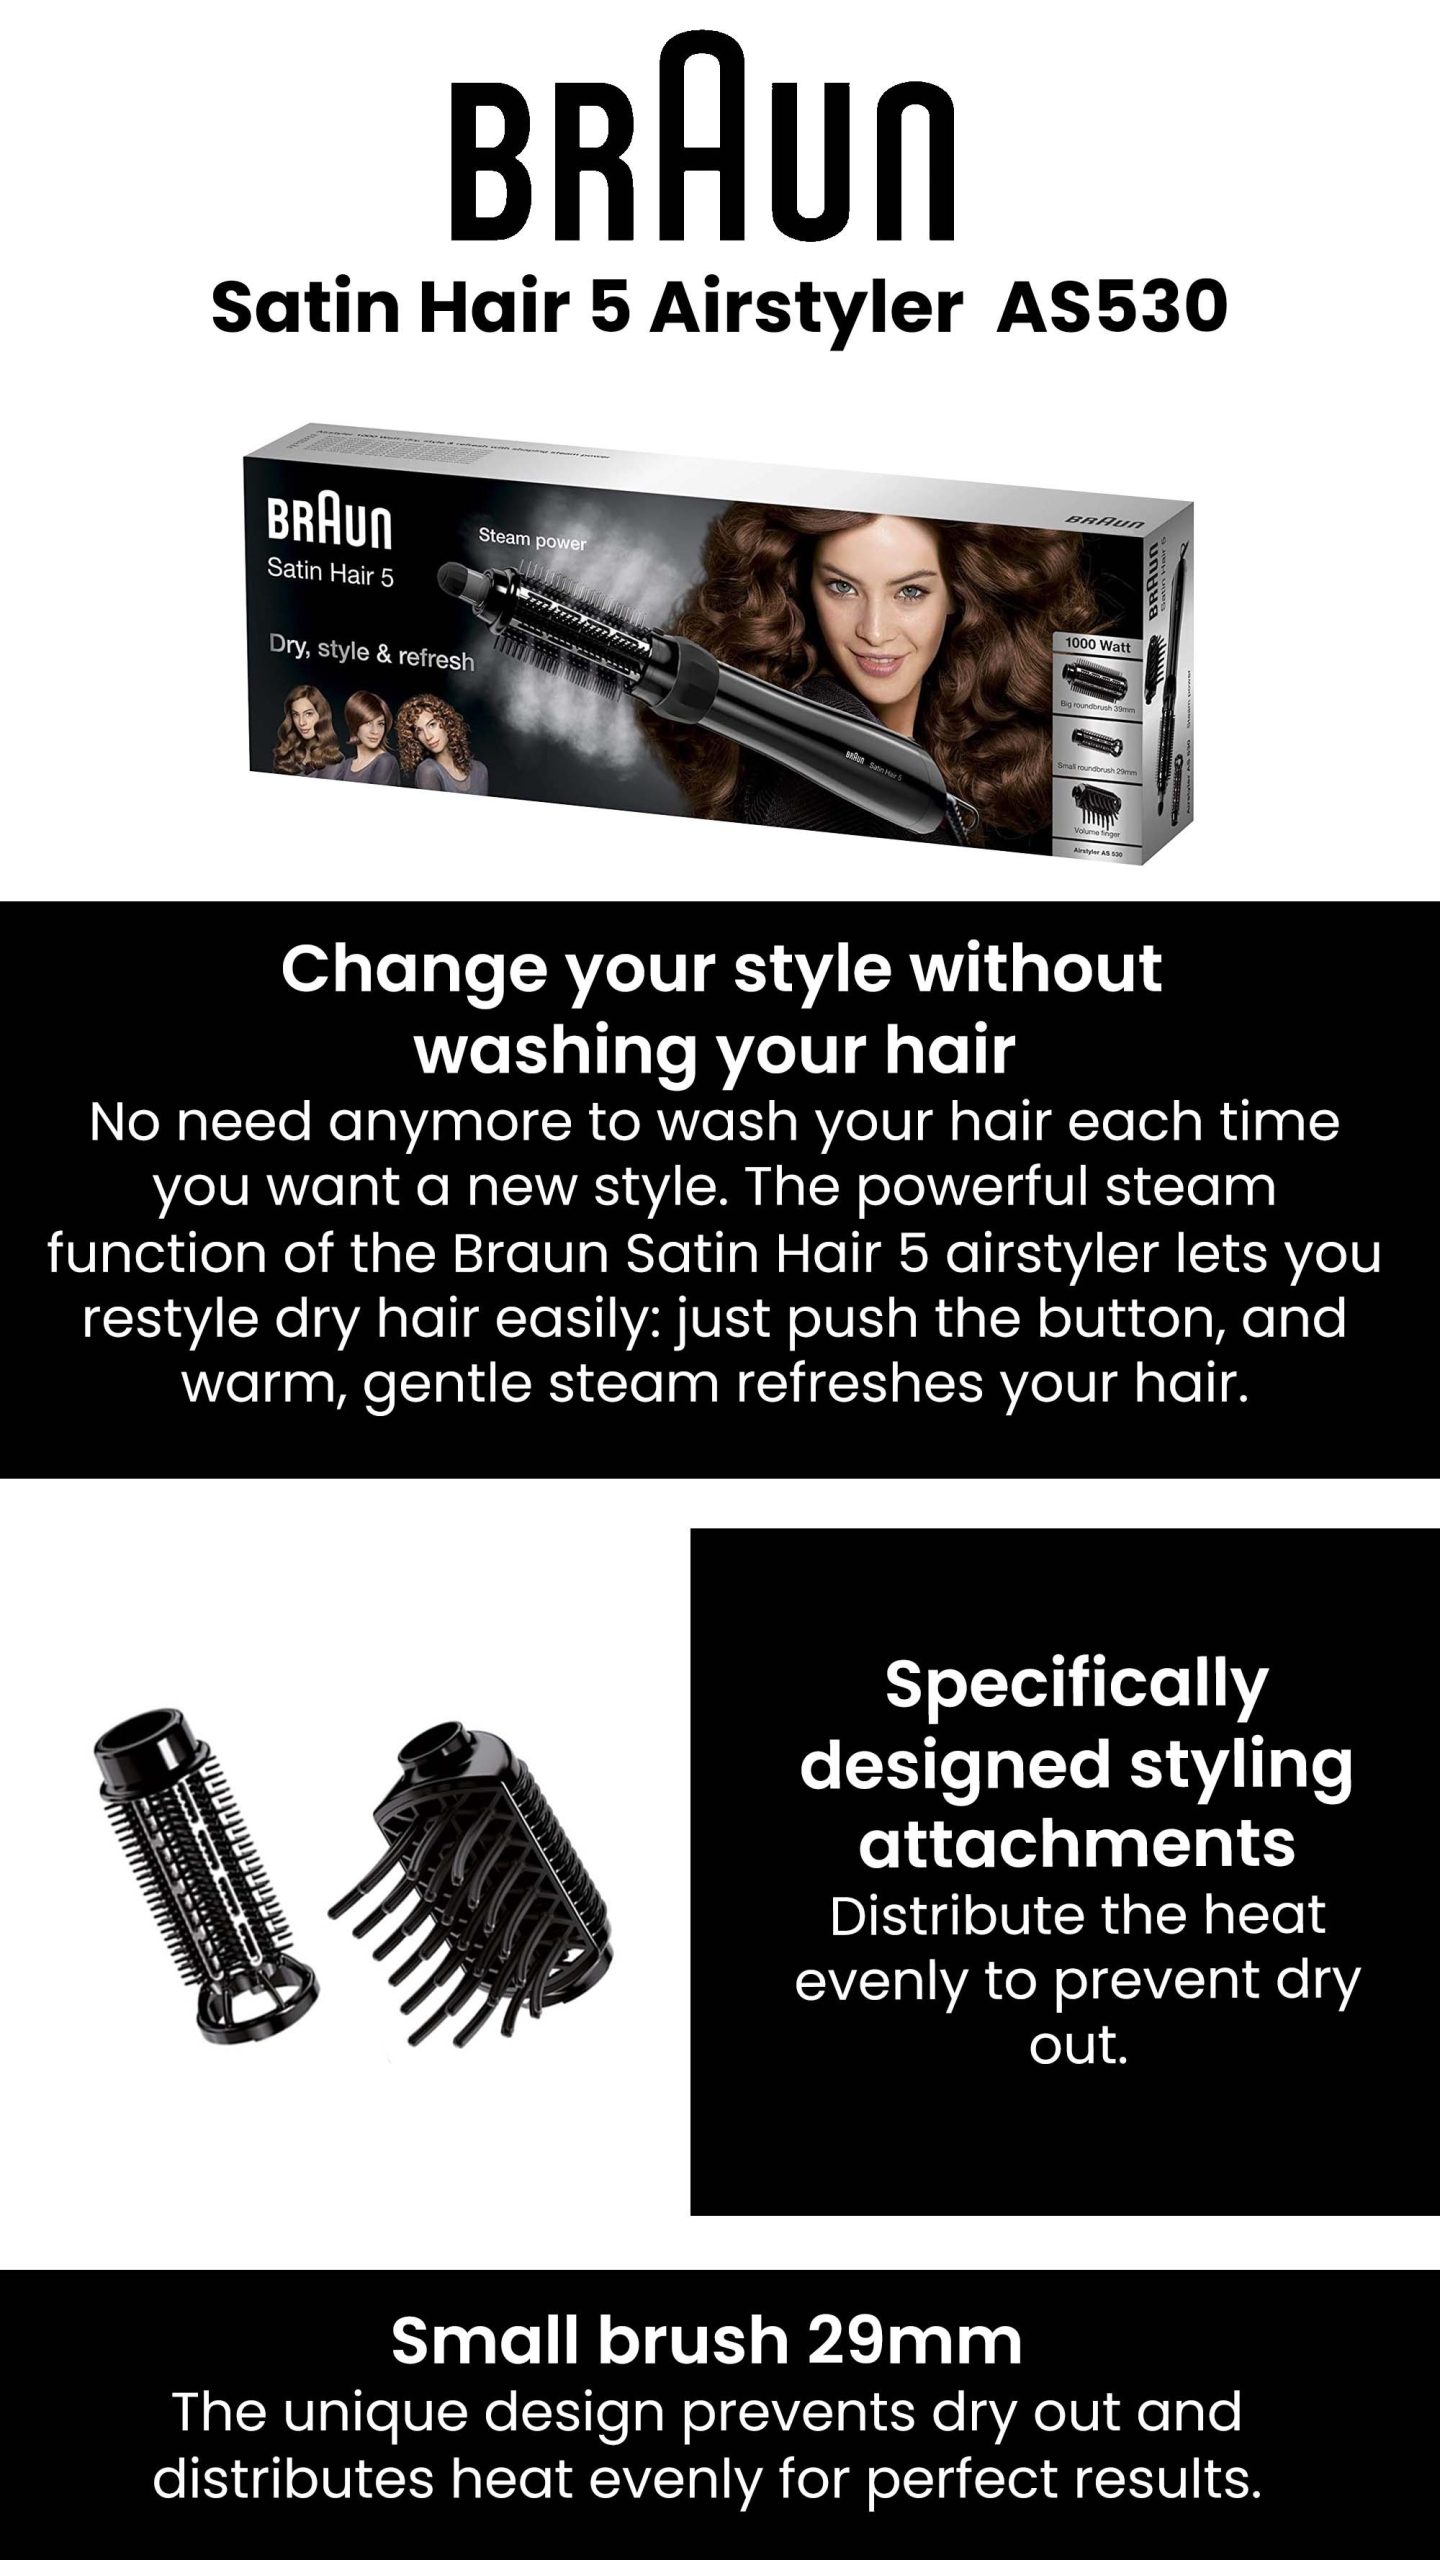 Powerful steam function releases vapour to style and restyle Even heat distribution won’t dry your hair out Specially designed filter mesh prevents hair from getting entangled and avoids breakage 3 heat/ airflow settings to avoid overheating A cold shot button provides the perfect finish for setting your style